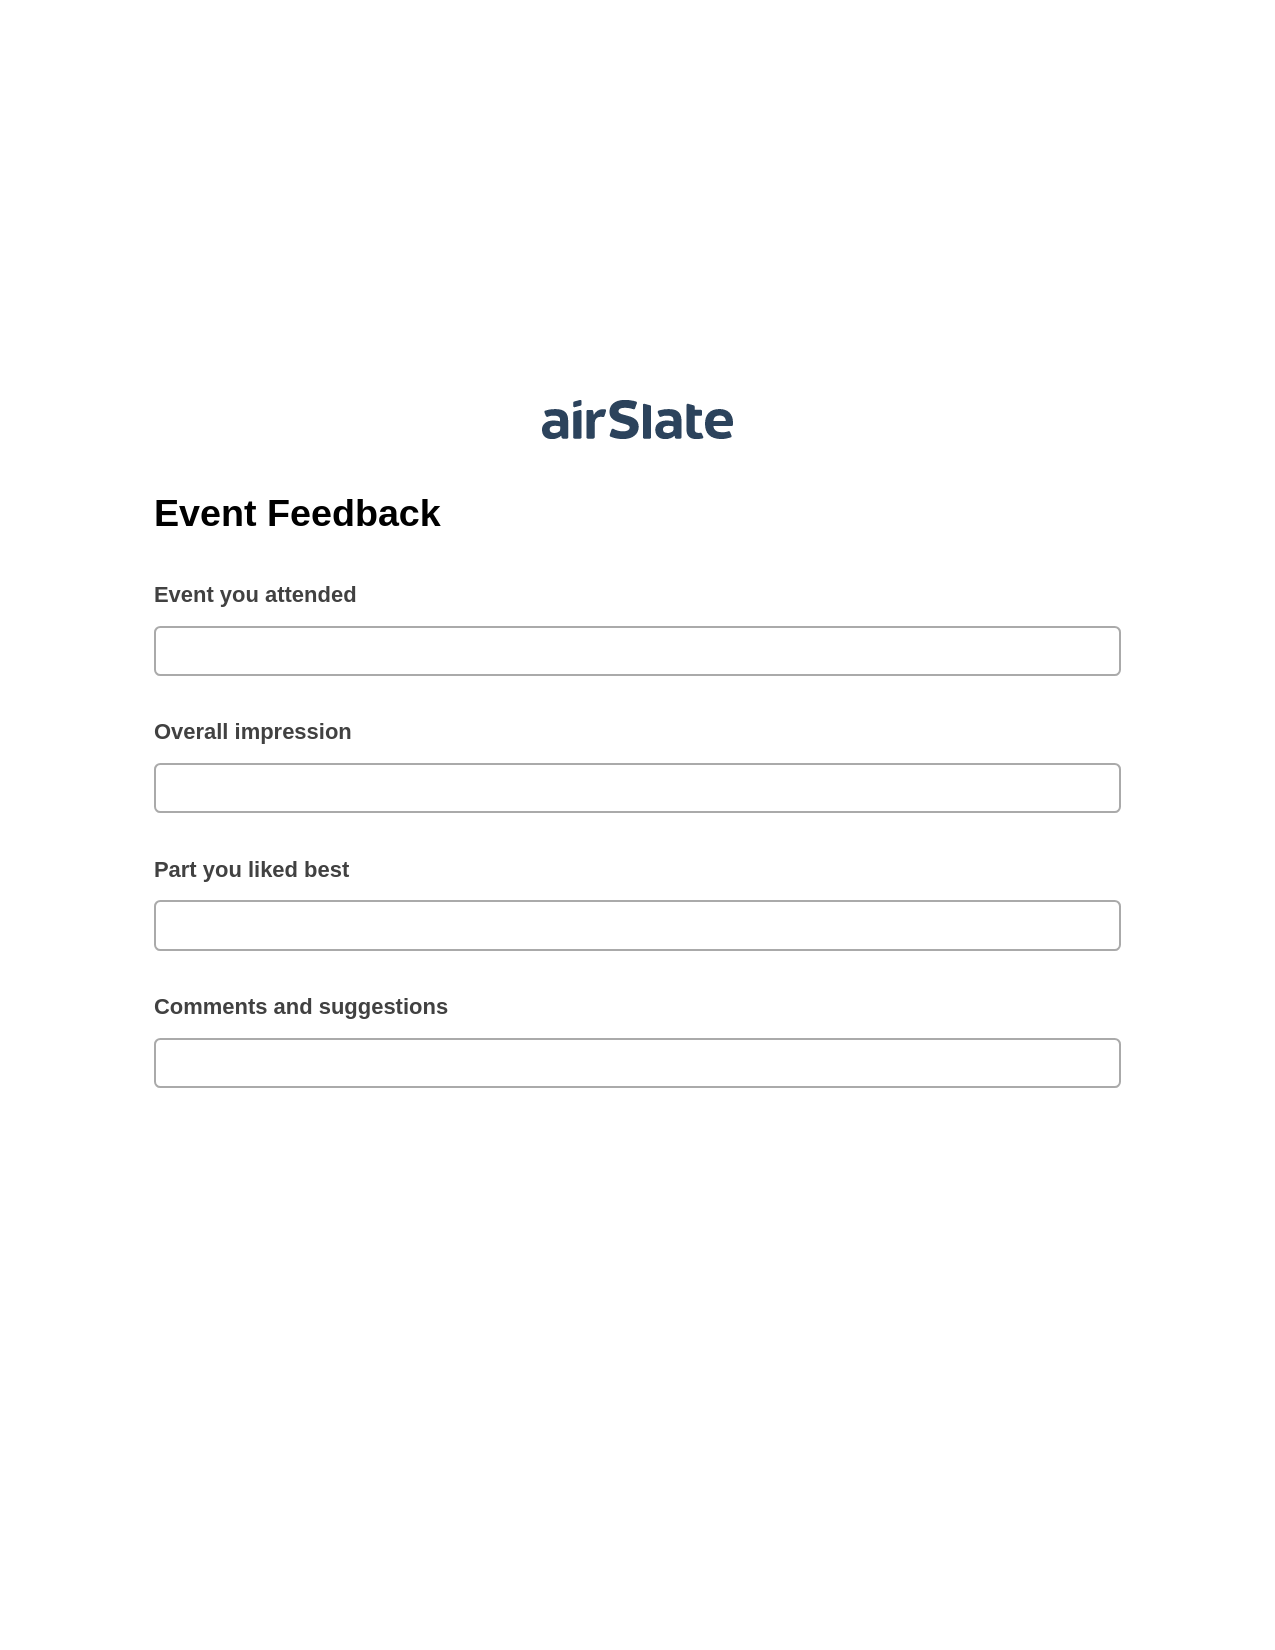 Event Feedback Pre-fill from NetSuite Records Bot, Audit Trail Bot, Slack Two-Way Binding Bot